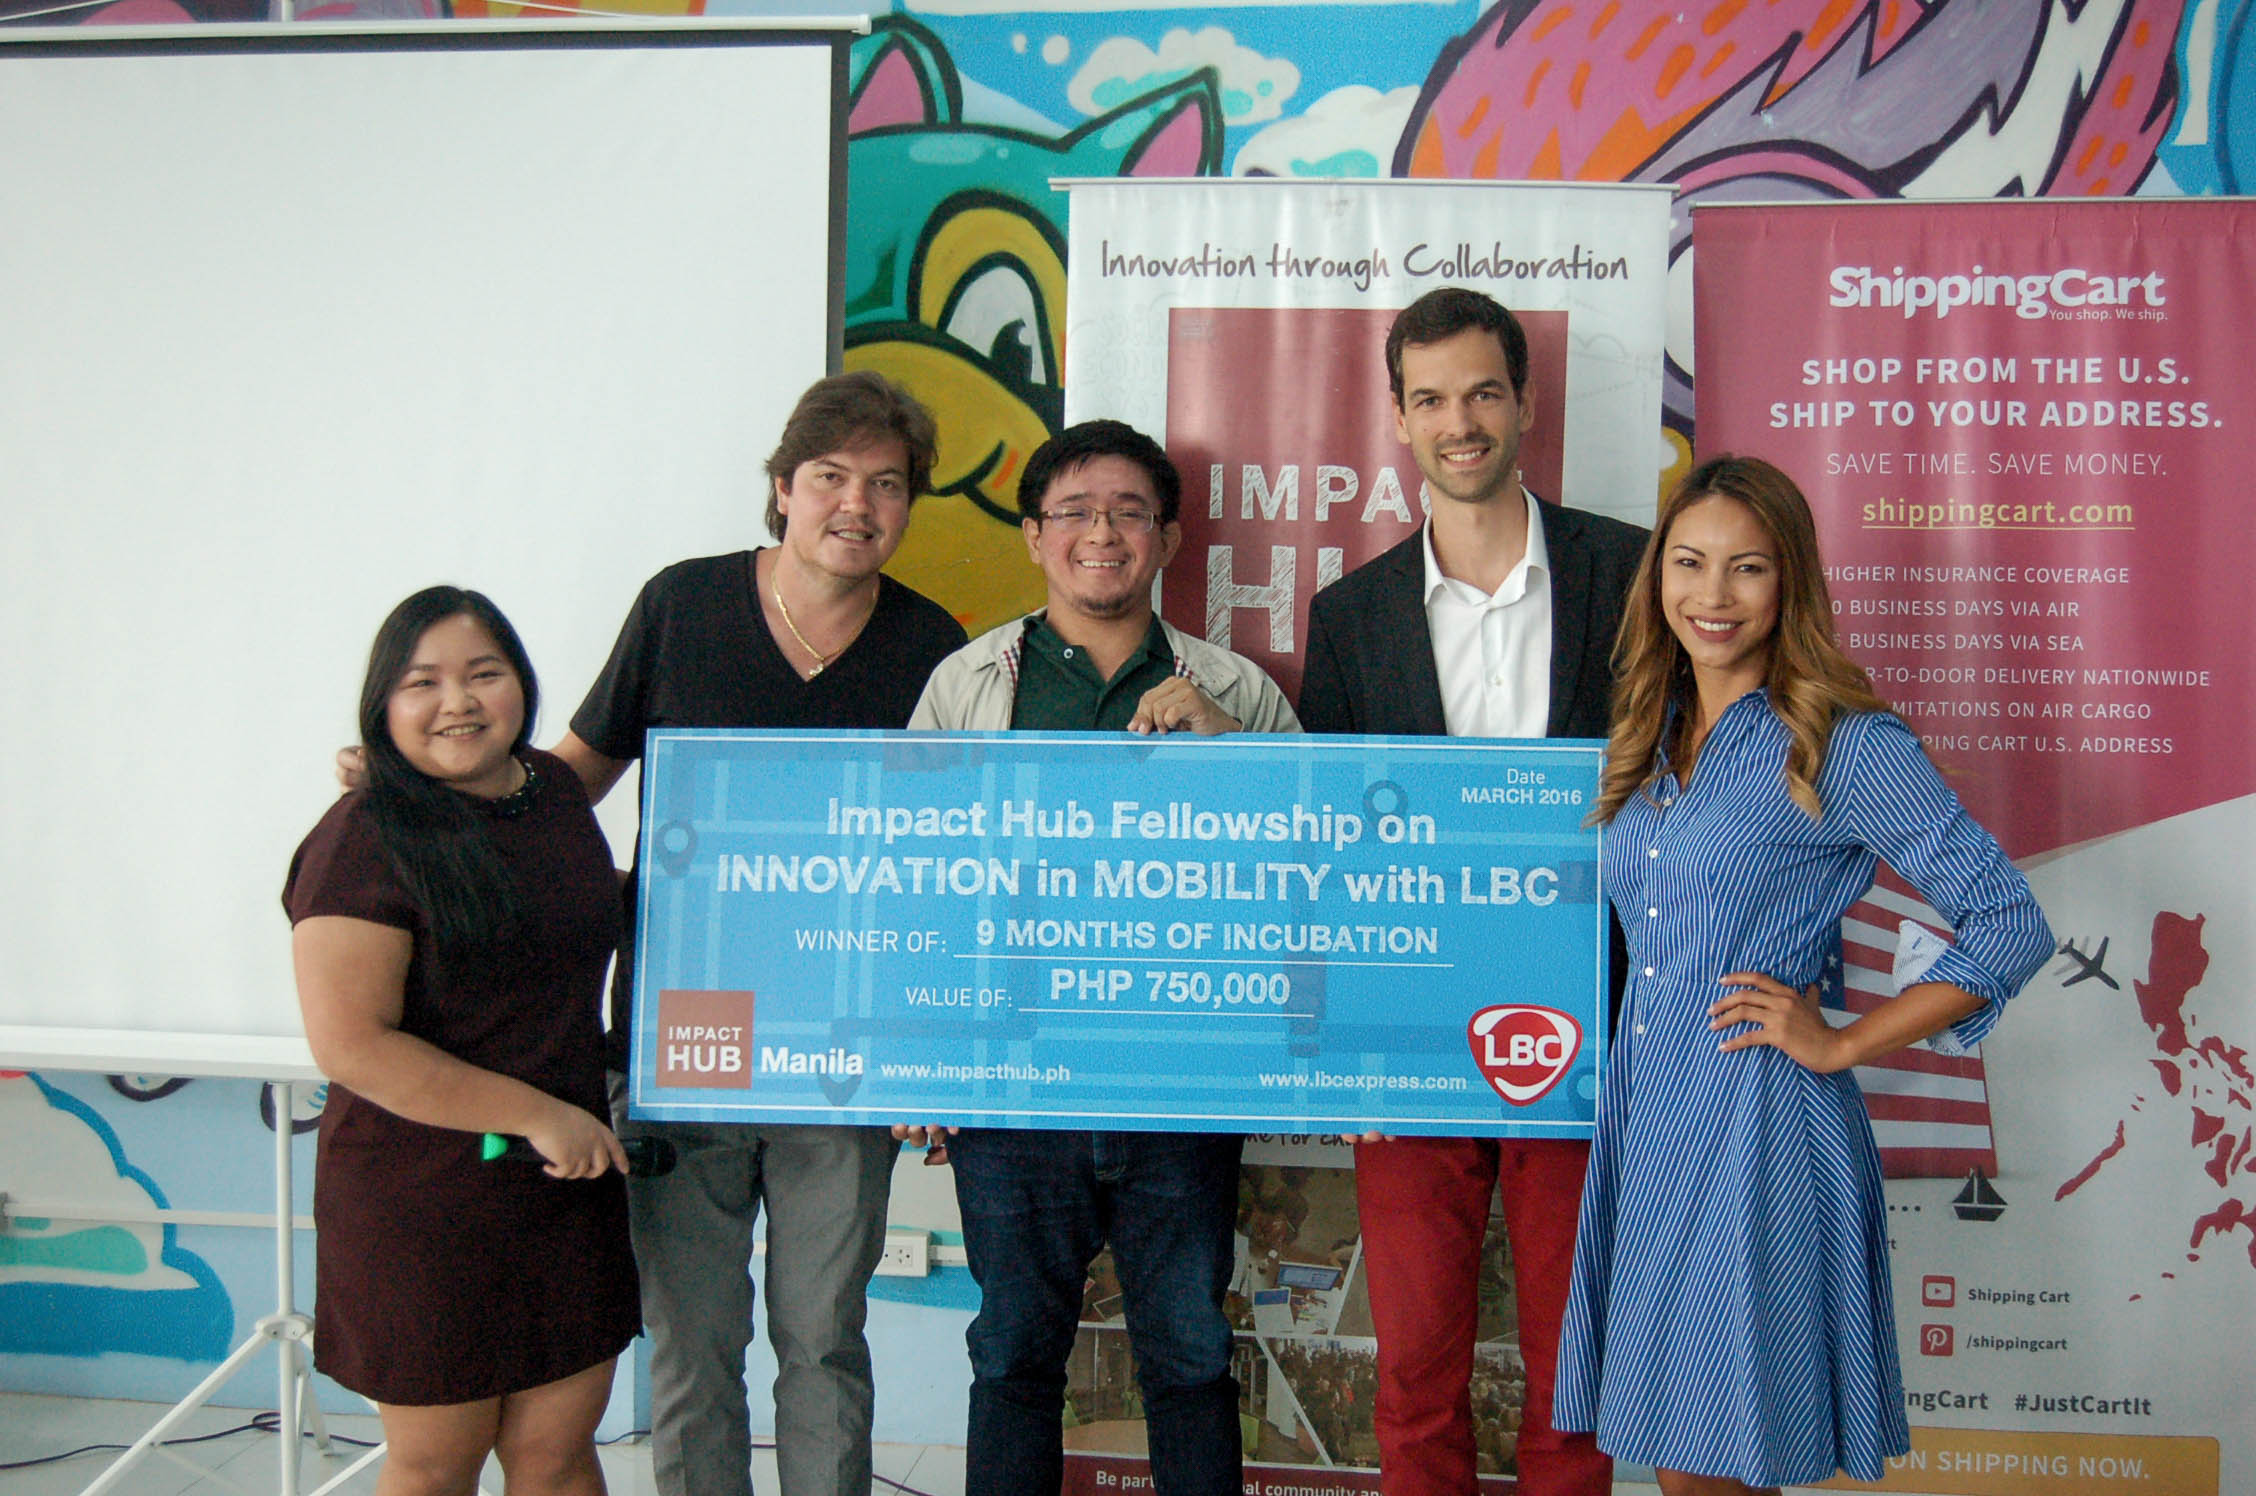 UP IN THE CLOUDS. SkyEye, Inc. Founder Matthew Cua (center) is all smiles as he receives his PhP750,000 prize from LBC Chief Innovation Officer Dino Araneta (2nd from left), and Impact Hub Co-founders Ces Rondario, (leftmost), Matthias Jaeggi (2nd from right), and LizAn Kuster (rightmost)